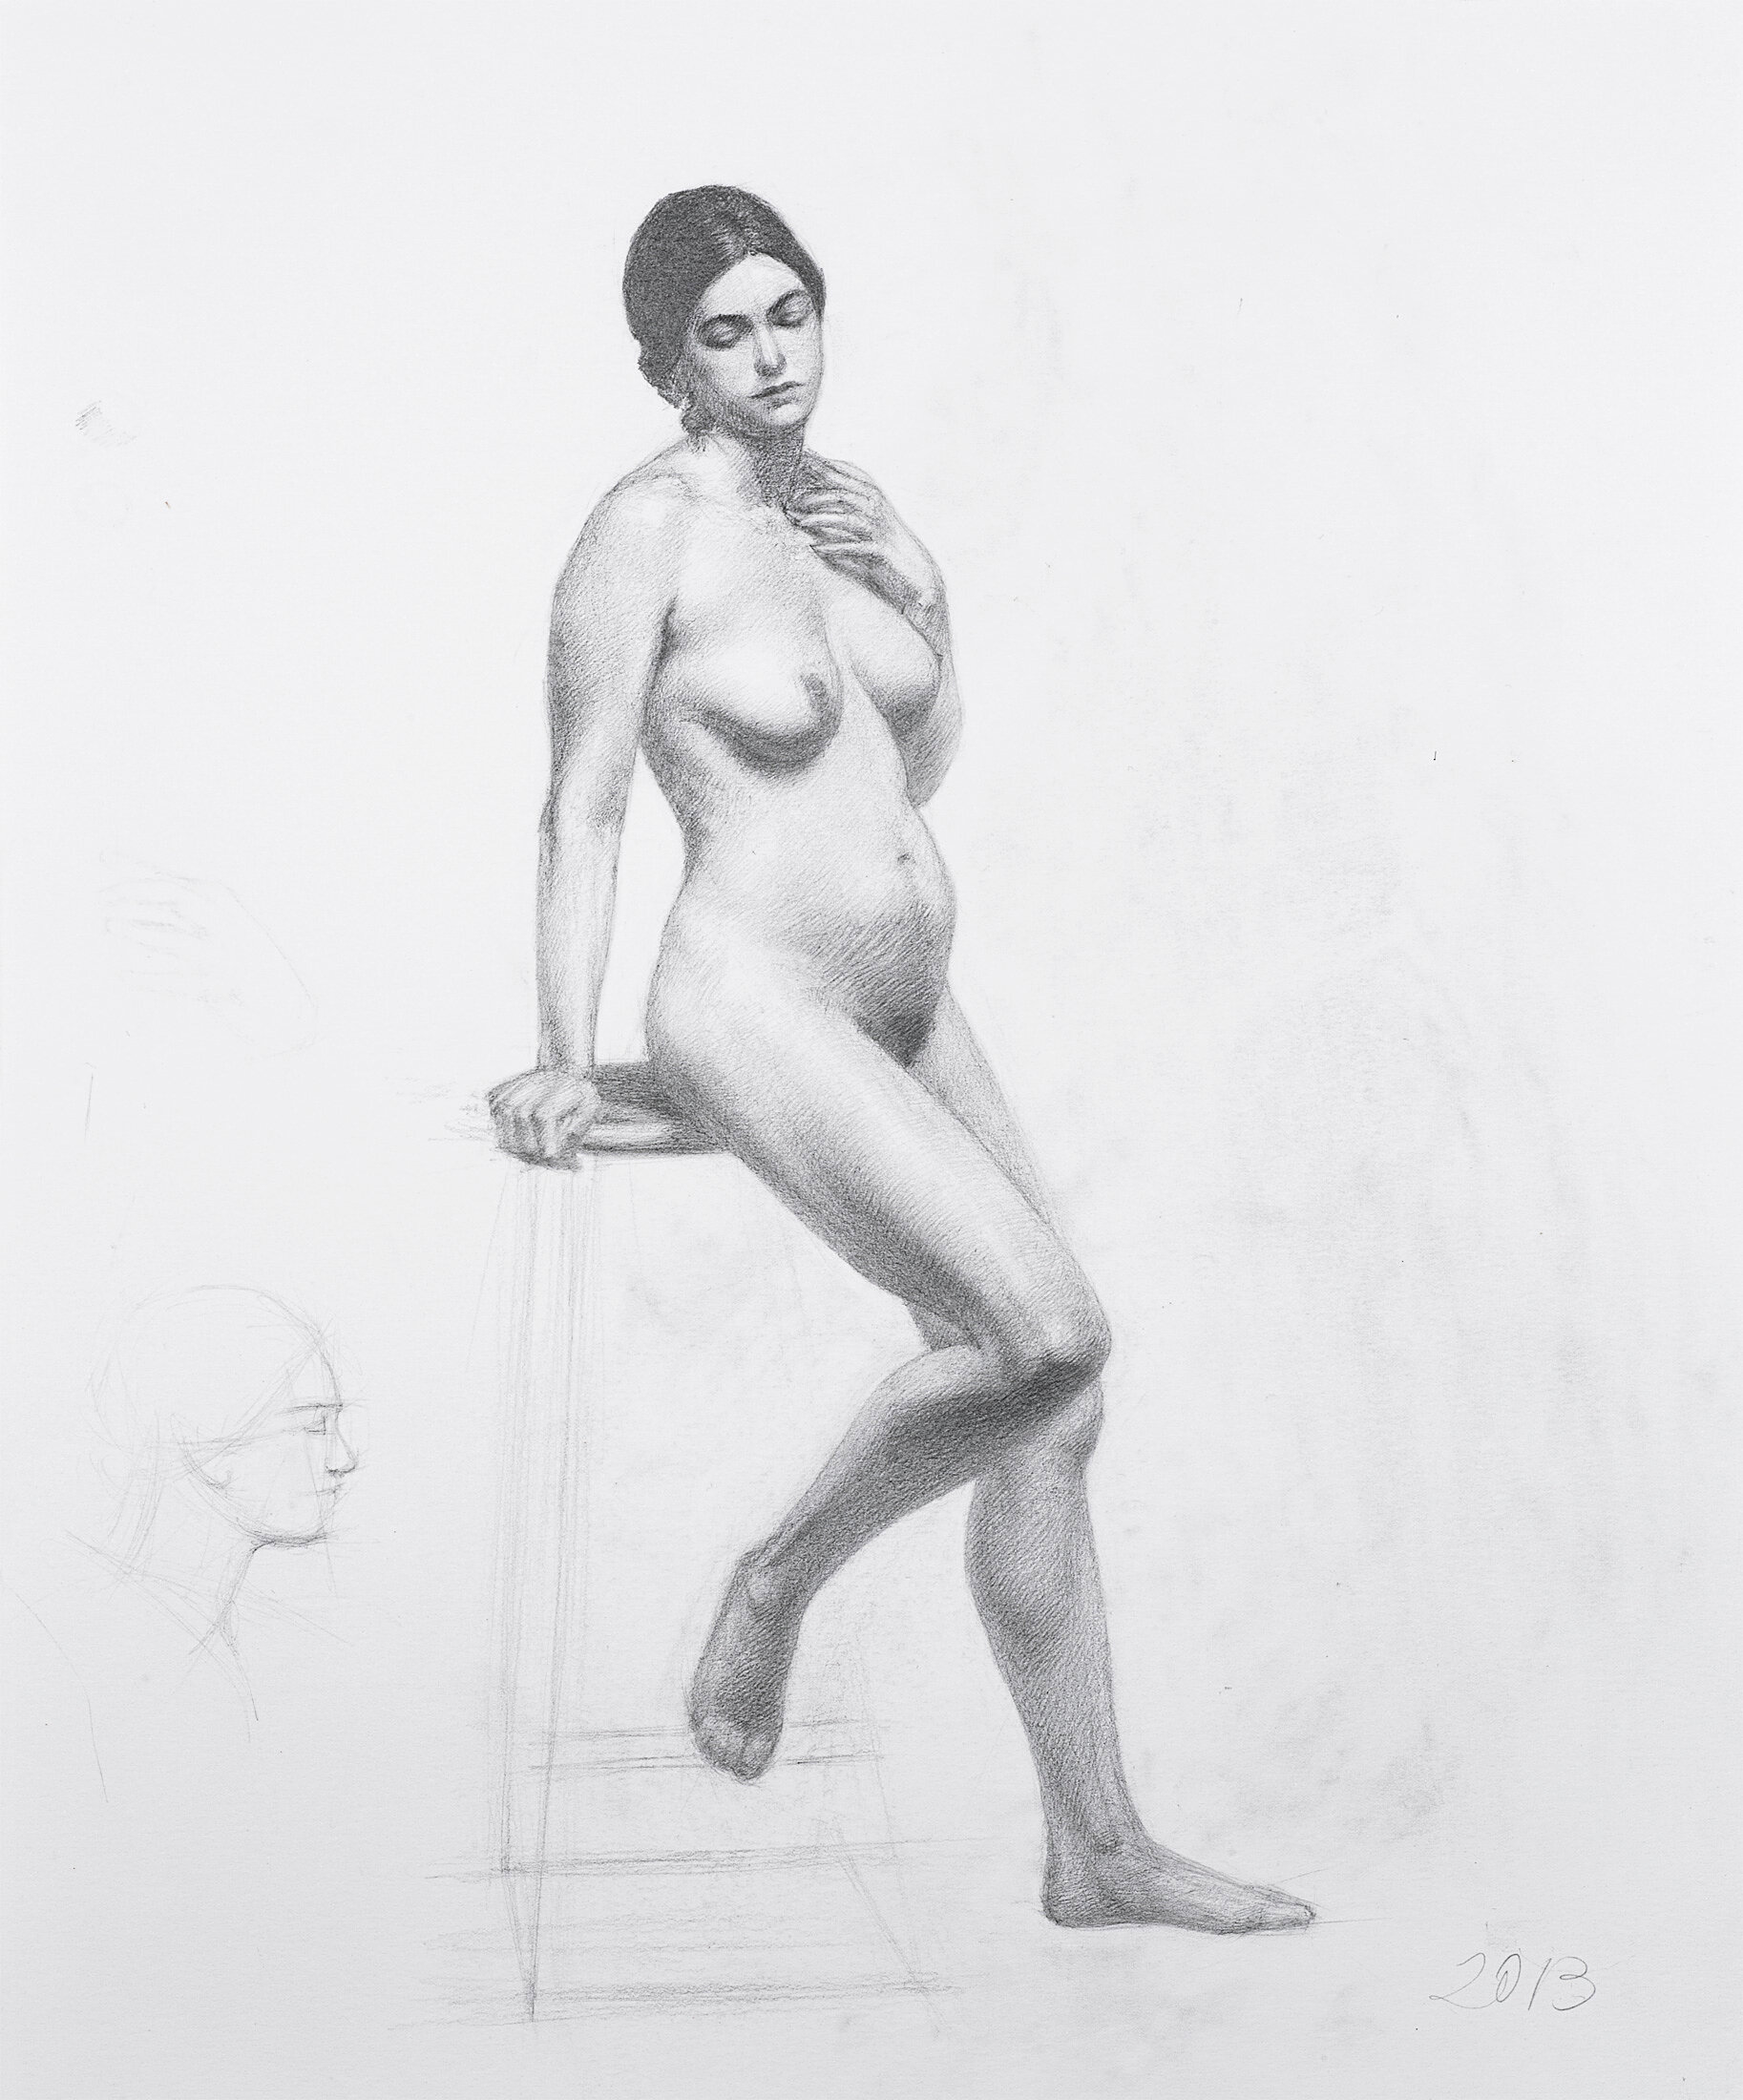 Nude Leaning on a Stool, 2013 - graphite pencil on paper